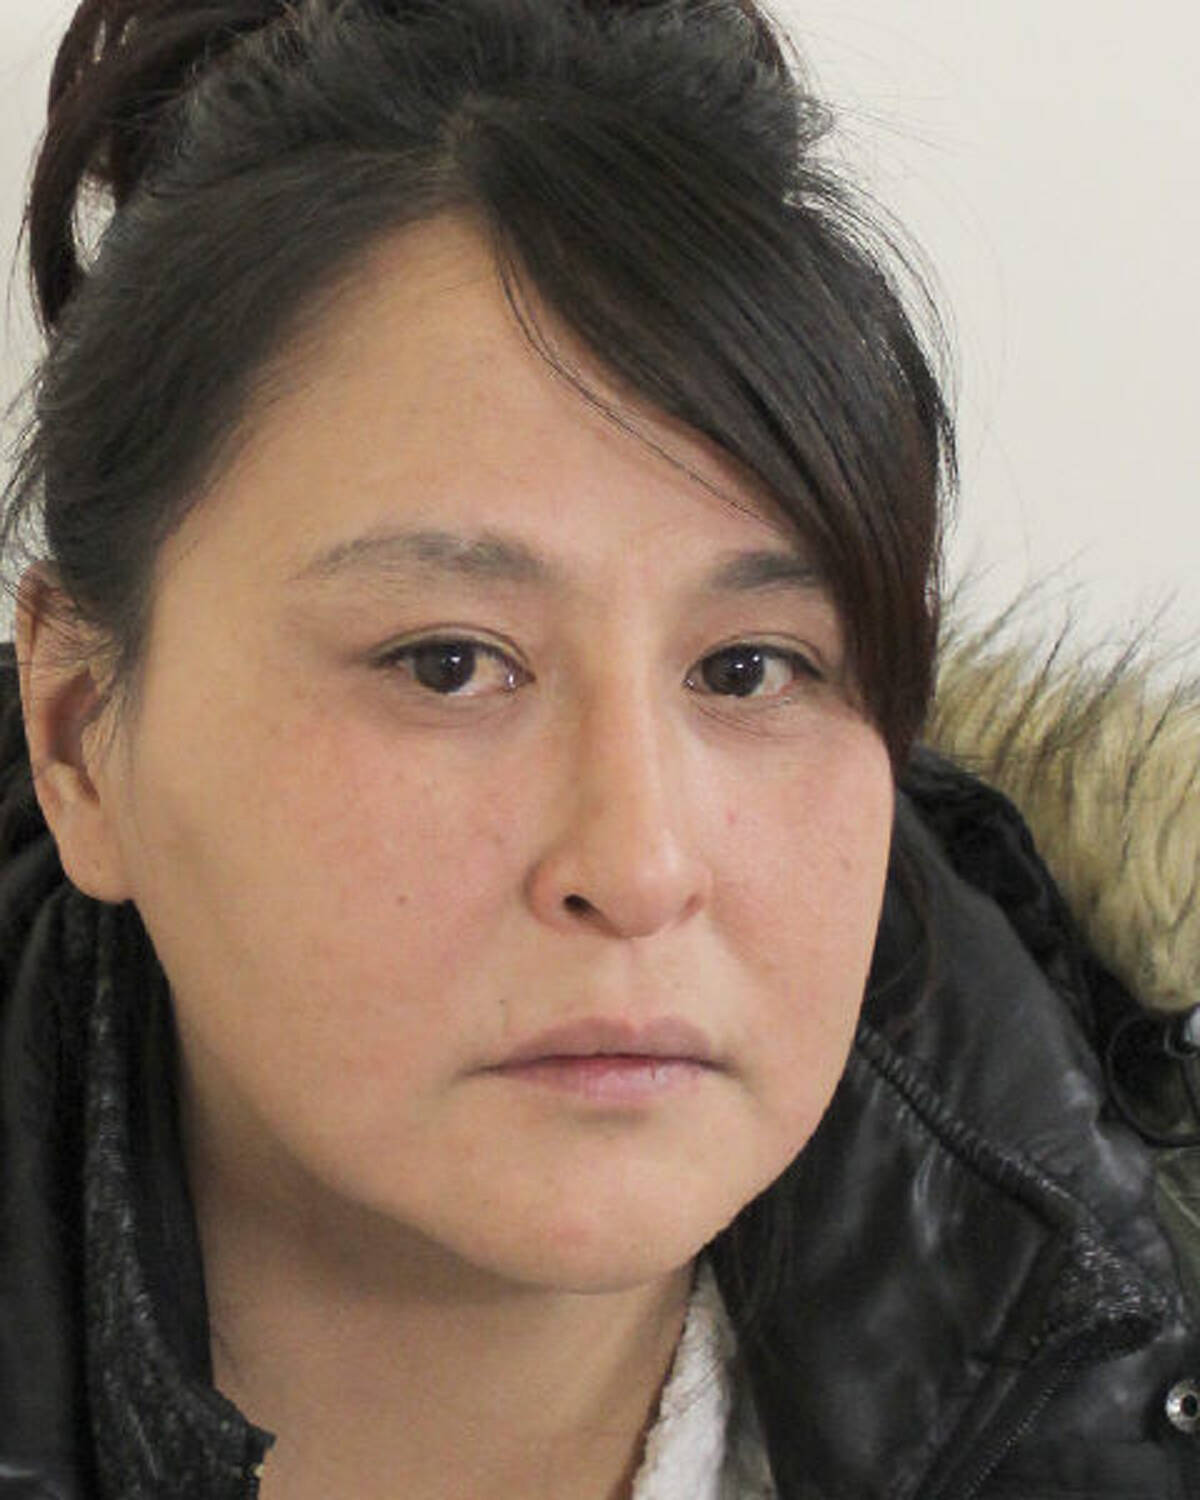                                             Yellowknife RCMP are asking anyone who knows anything about the whereabouts of Tanya Harry to call crimestoppers or police. She was last seen Sept. 28 and has missed several appointments.          